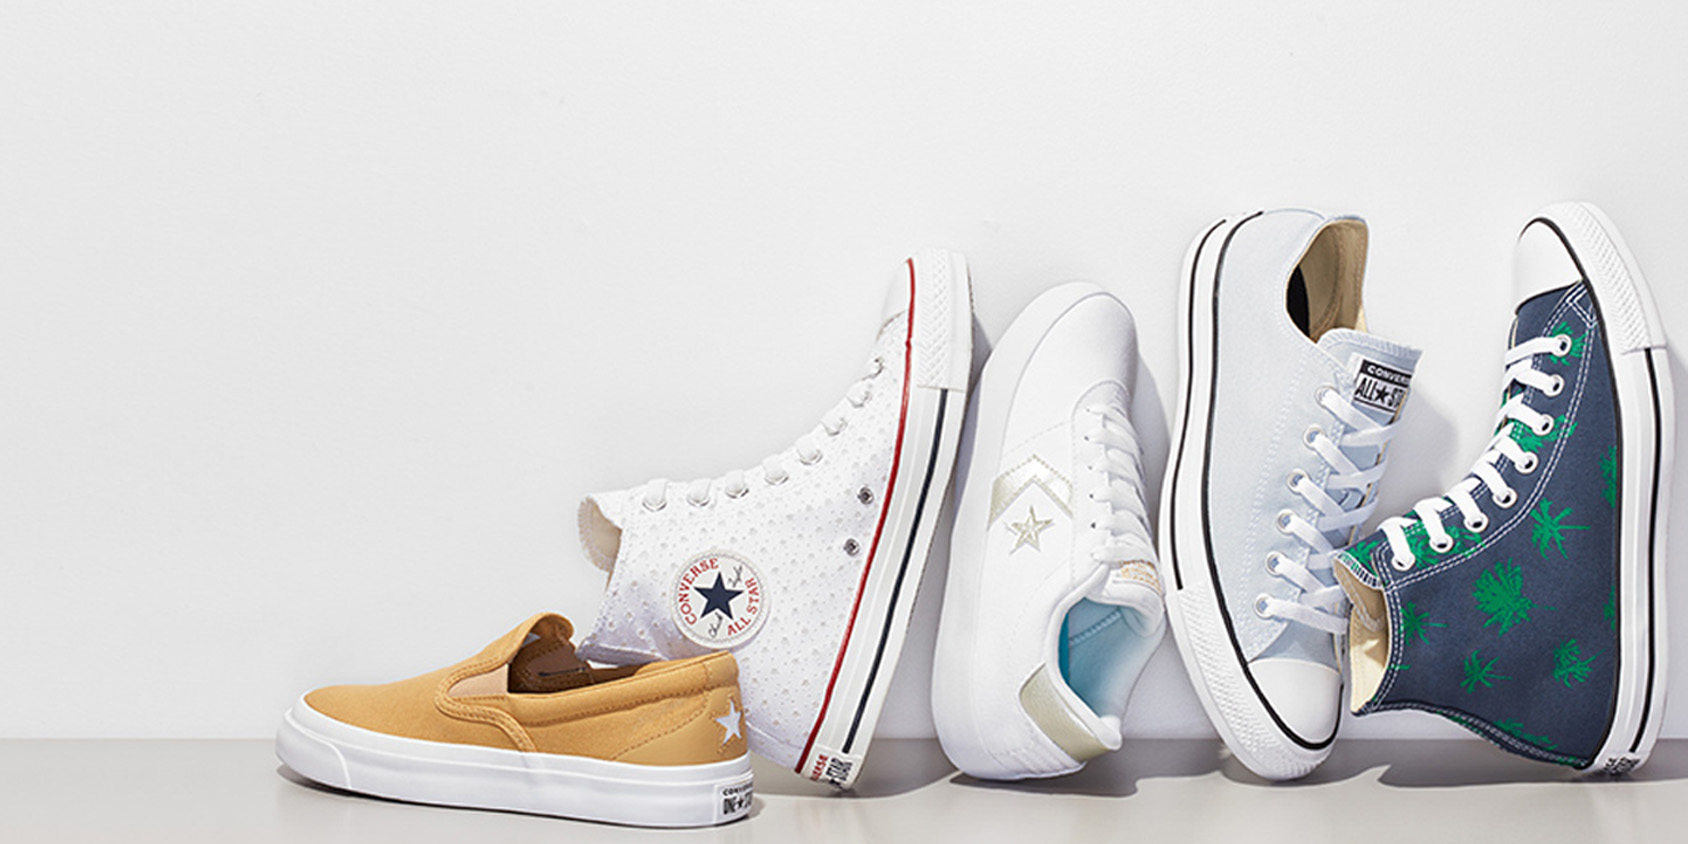 converse offers